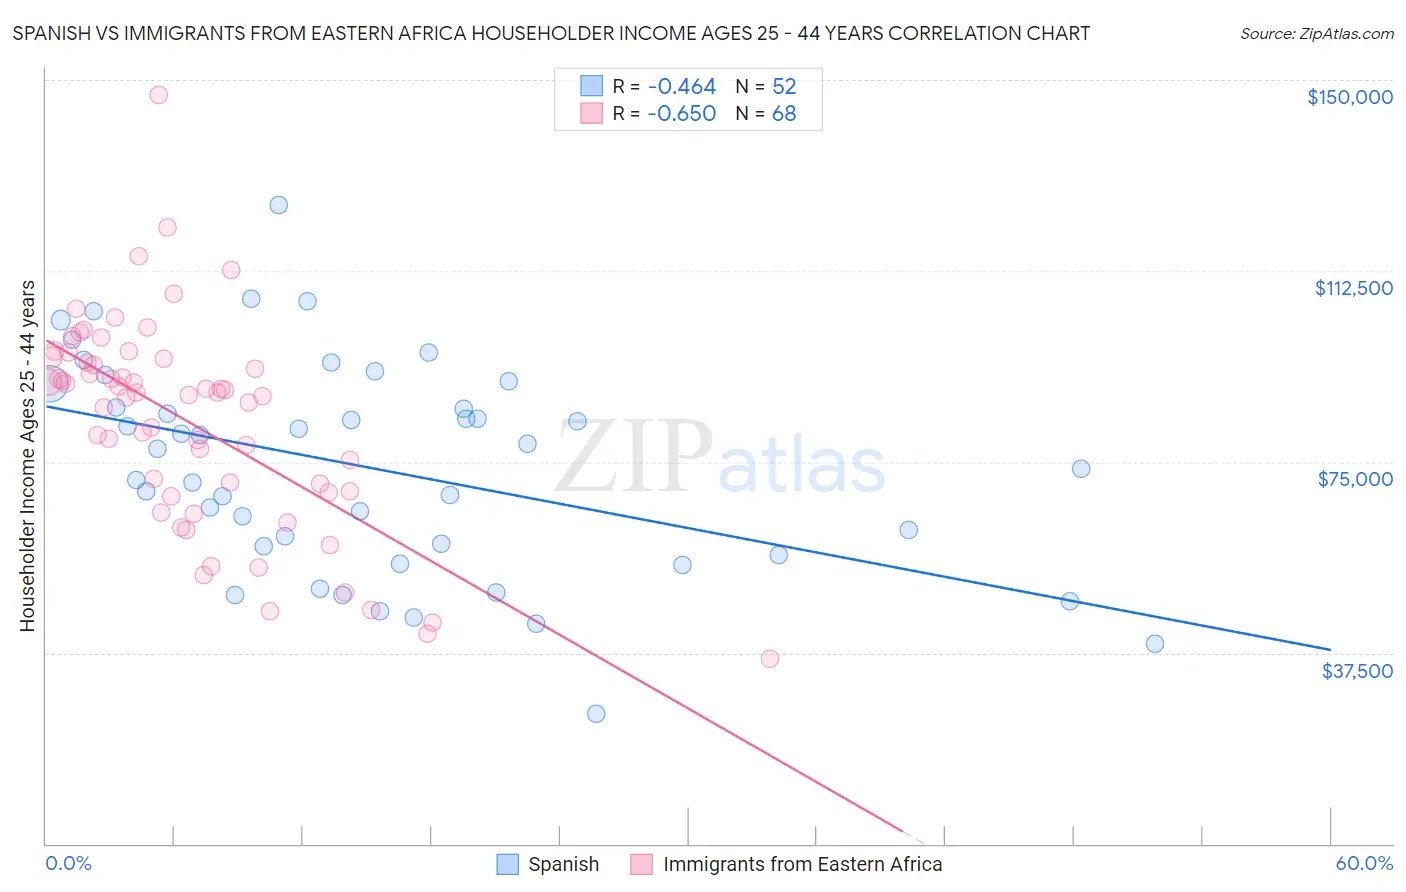 Spanish vs Immigrants from Eastern Africa Householder Income Ages 25 - 44 years